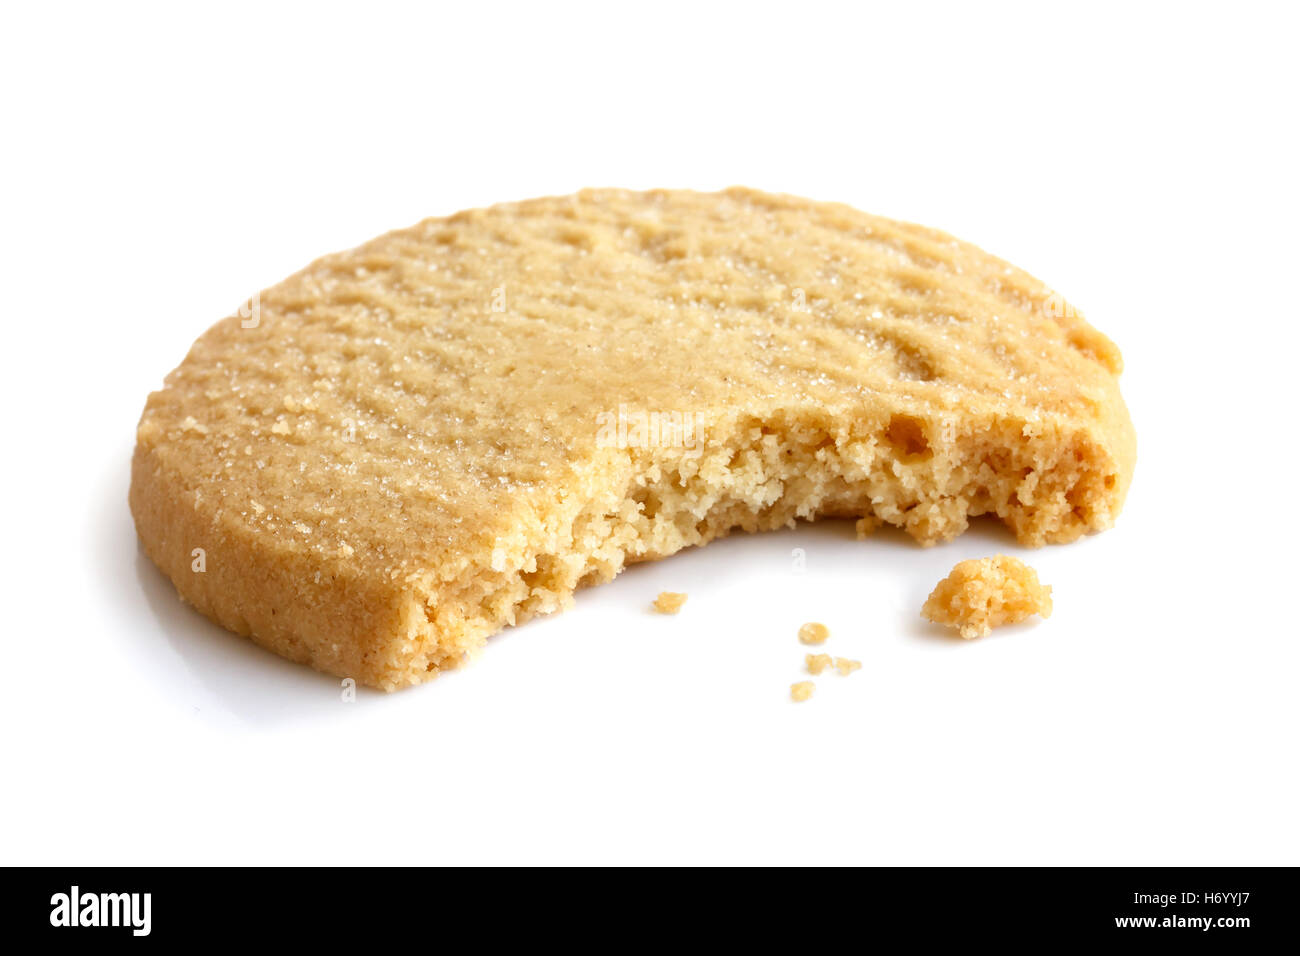 Single round shortbread biscuit with crumbs and bite missing. In perspective. Stock Photo